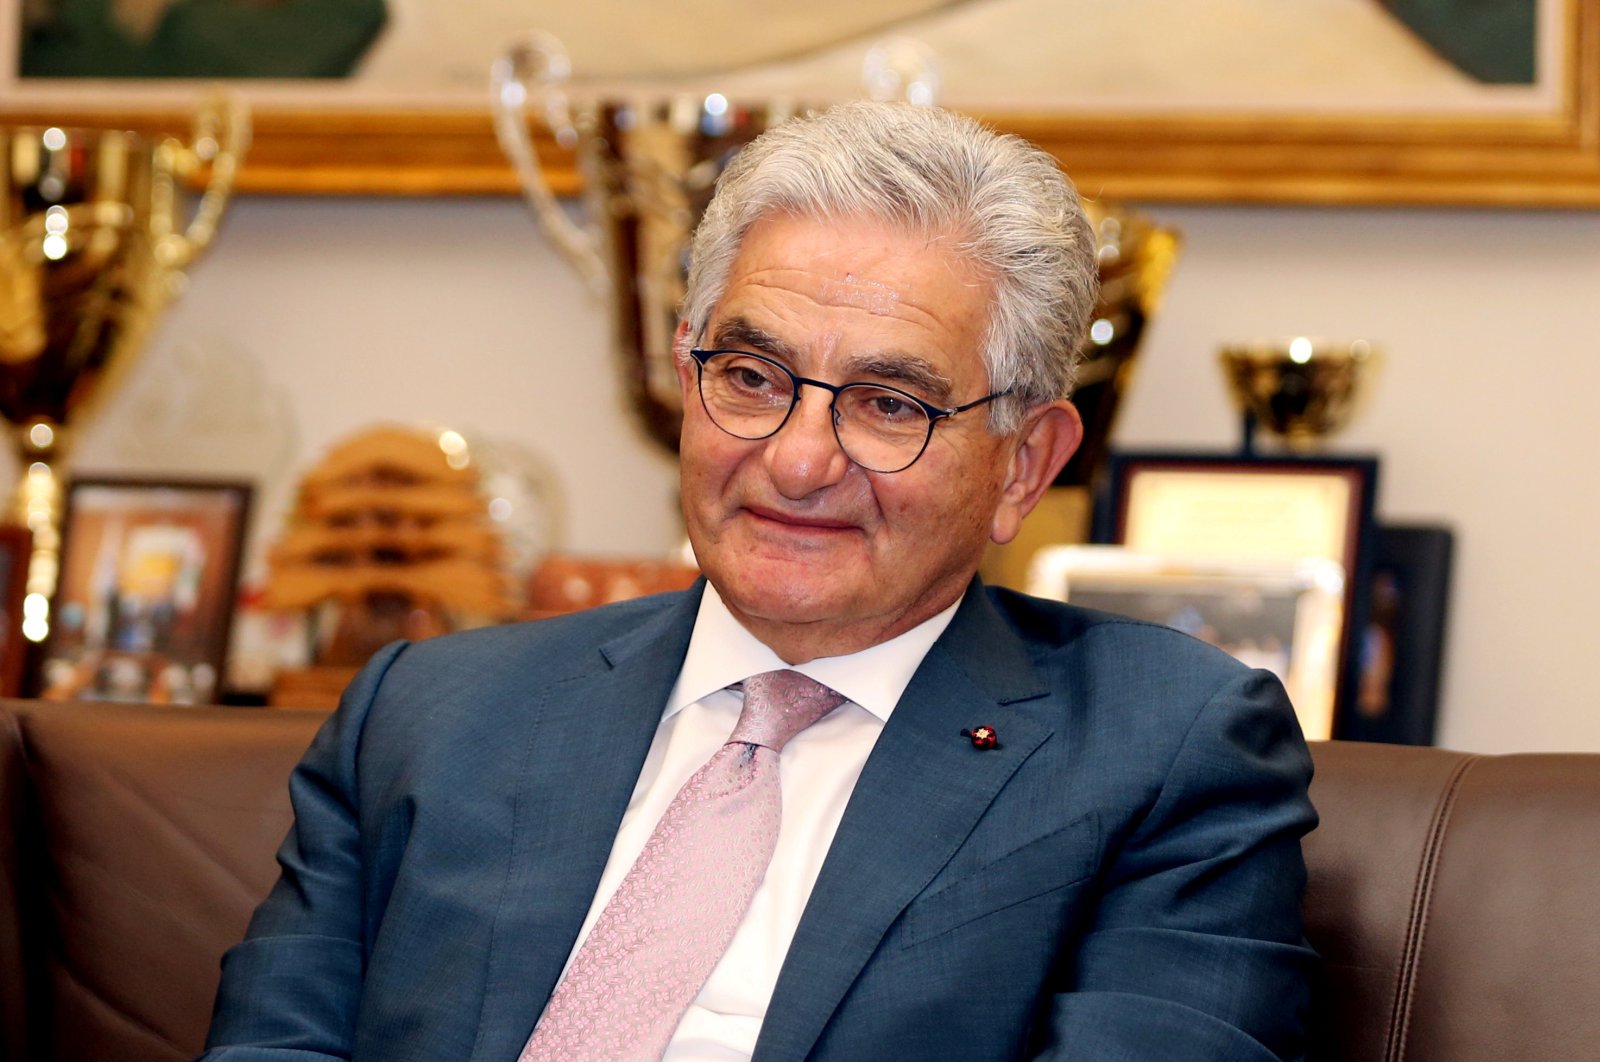 Salim Sfeir, chairman of the Association of Banks in Lebanon (ABL) and chief executive of the Bank of Beirut, speaks during an interview with Reuters in Beirut, Lebanon, July 22, 2019. (Reuters Photo)